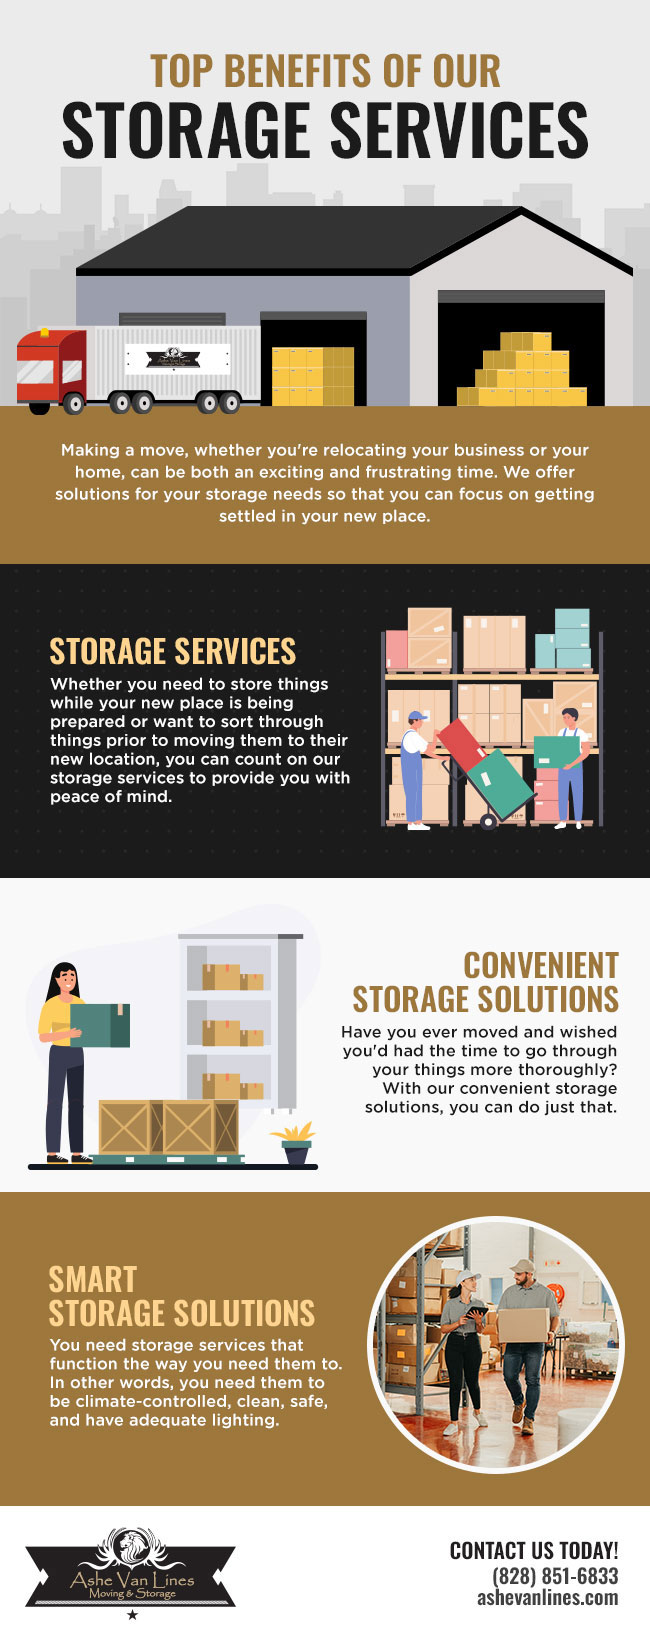 Top Benefits of Our Storage Services